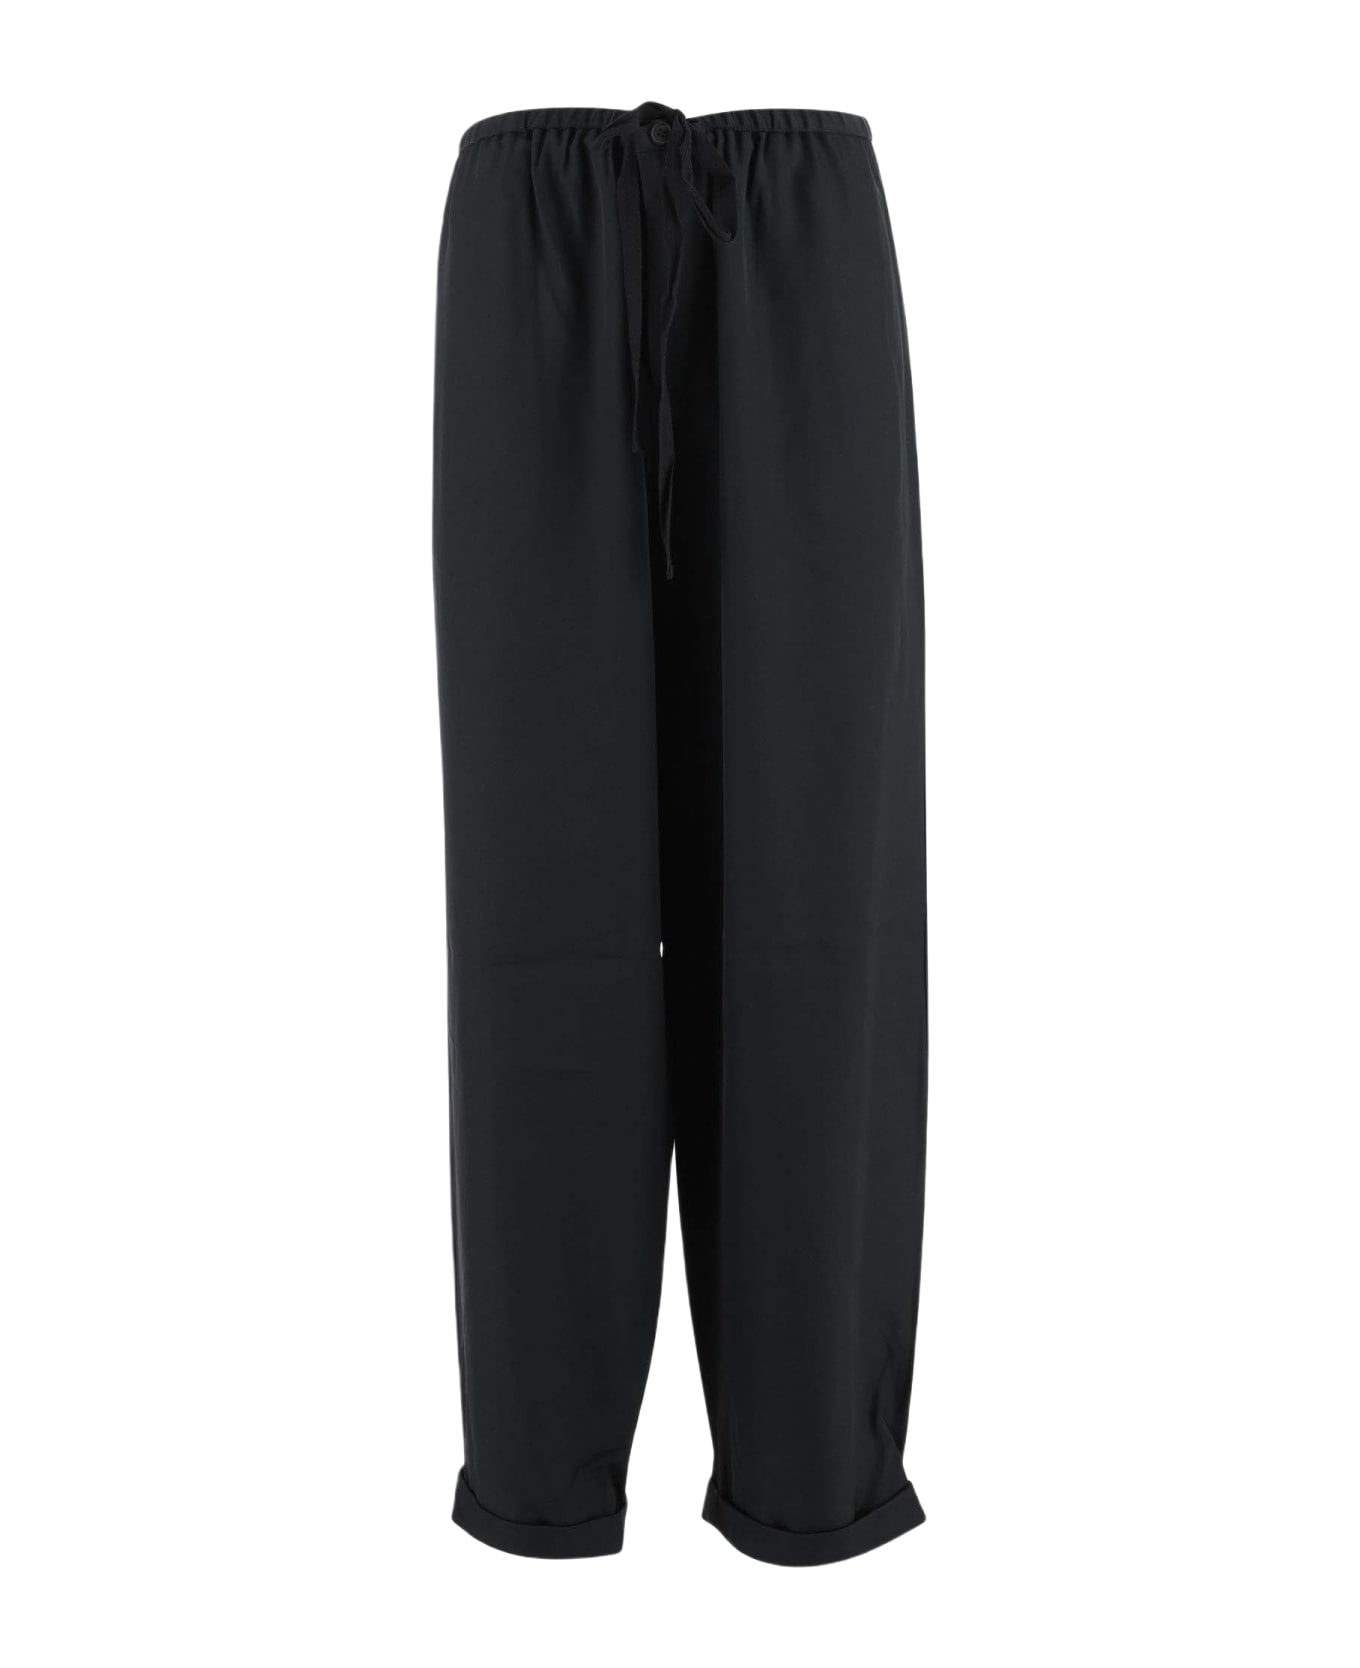 By Malene Birger Joanni Synthetic Fabric Trousers - Black ボトムス